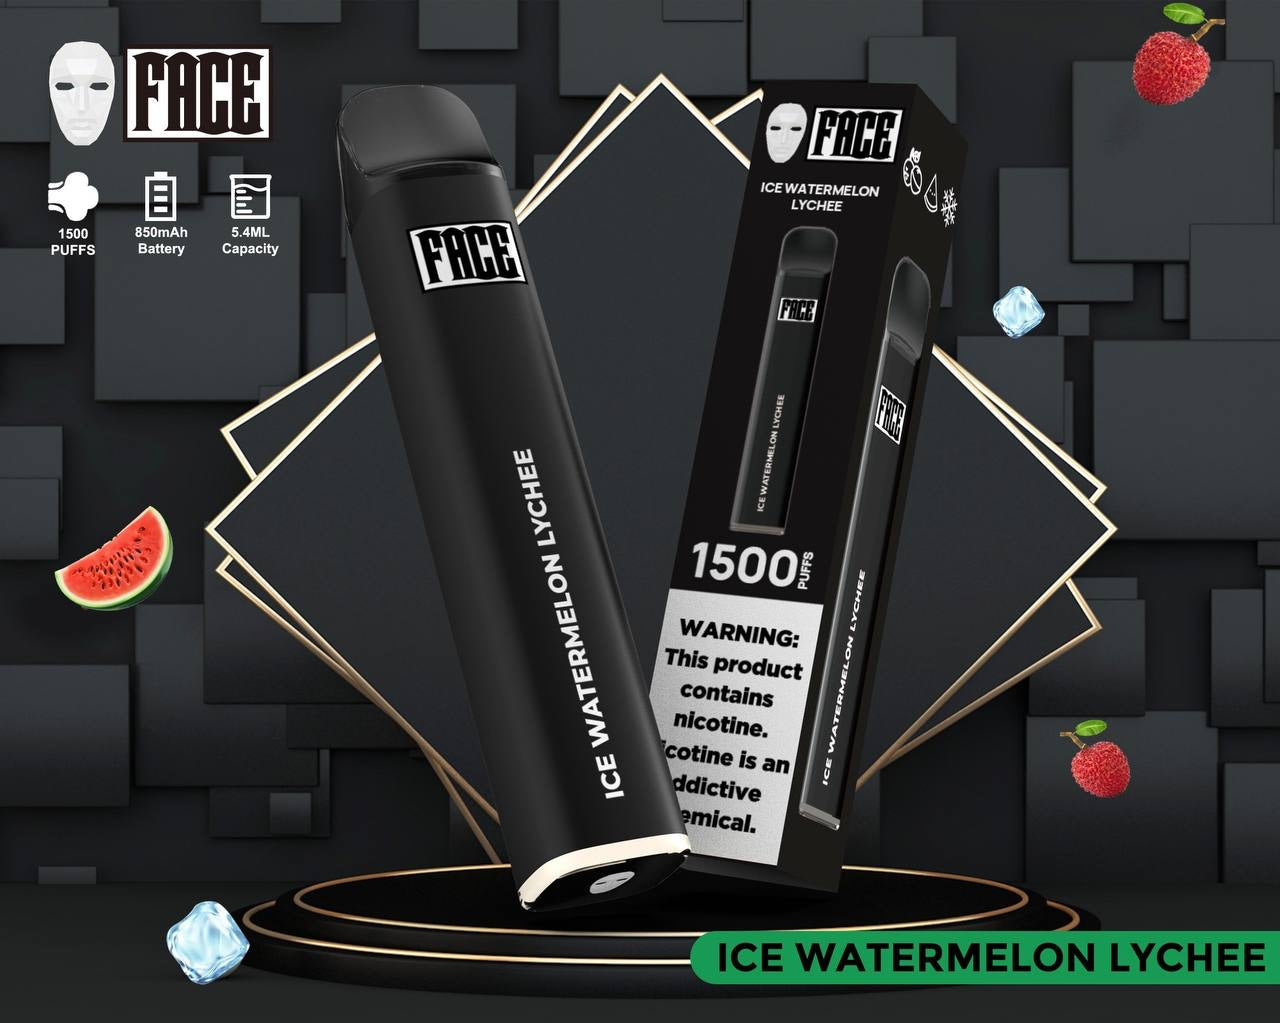 Face Ice Watermelon Lychee 1500